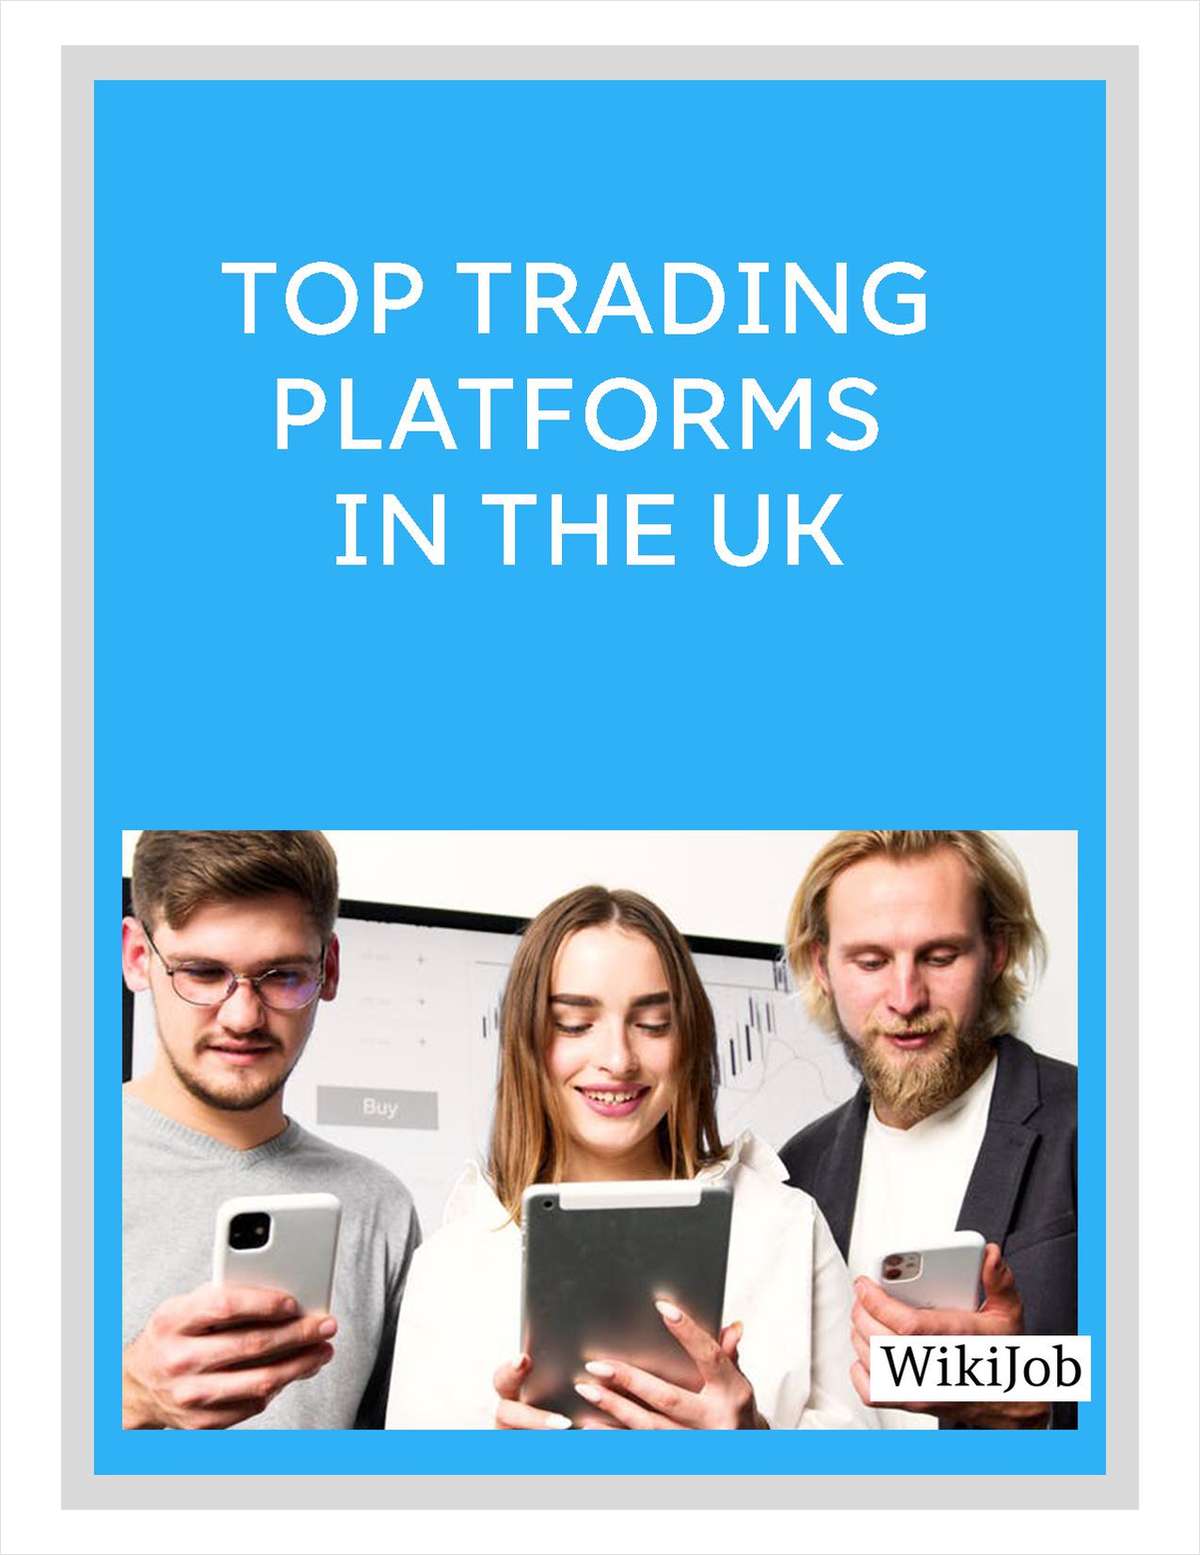 Top Trading Platforms in the UK